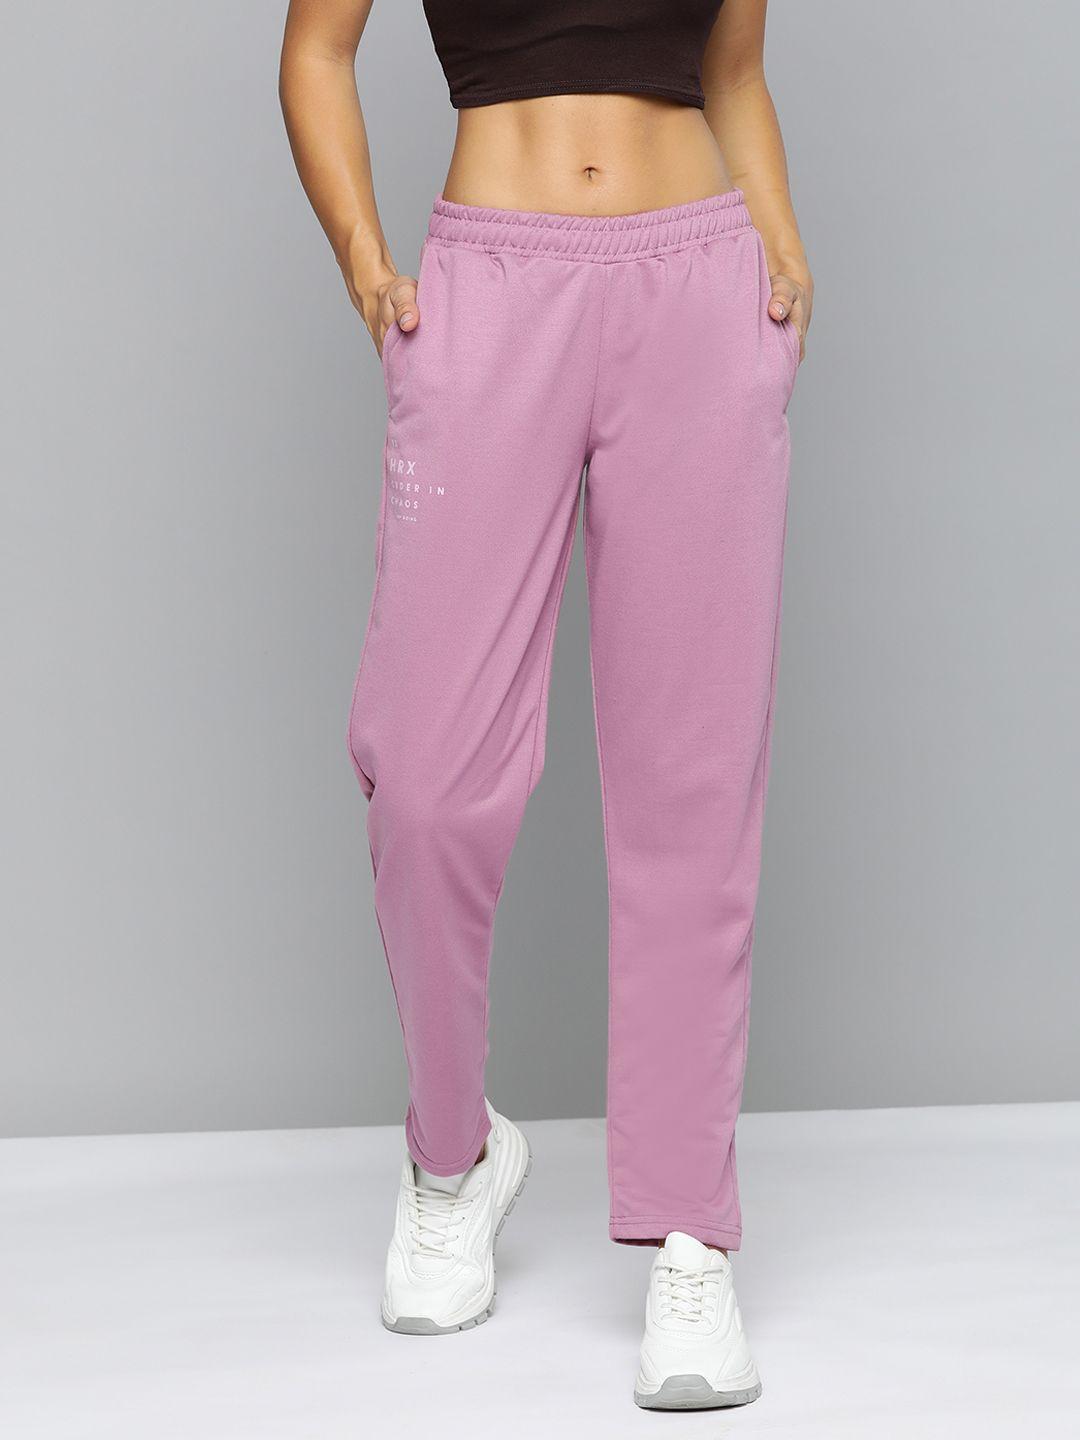 hrx by hrithik roshan women solid lifestyle track pants